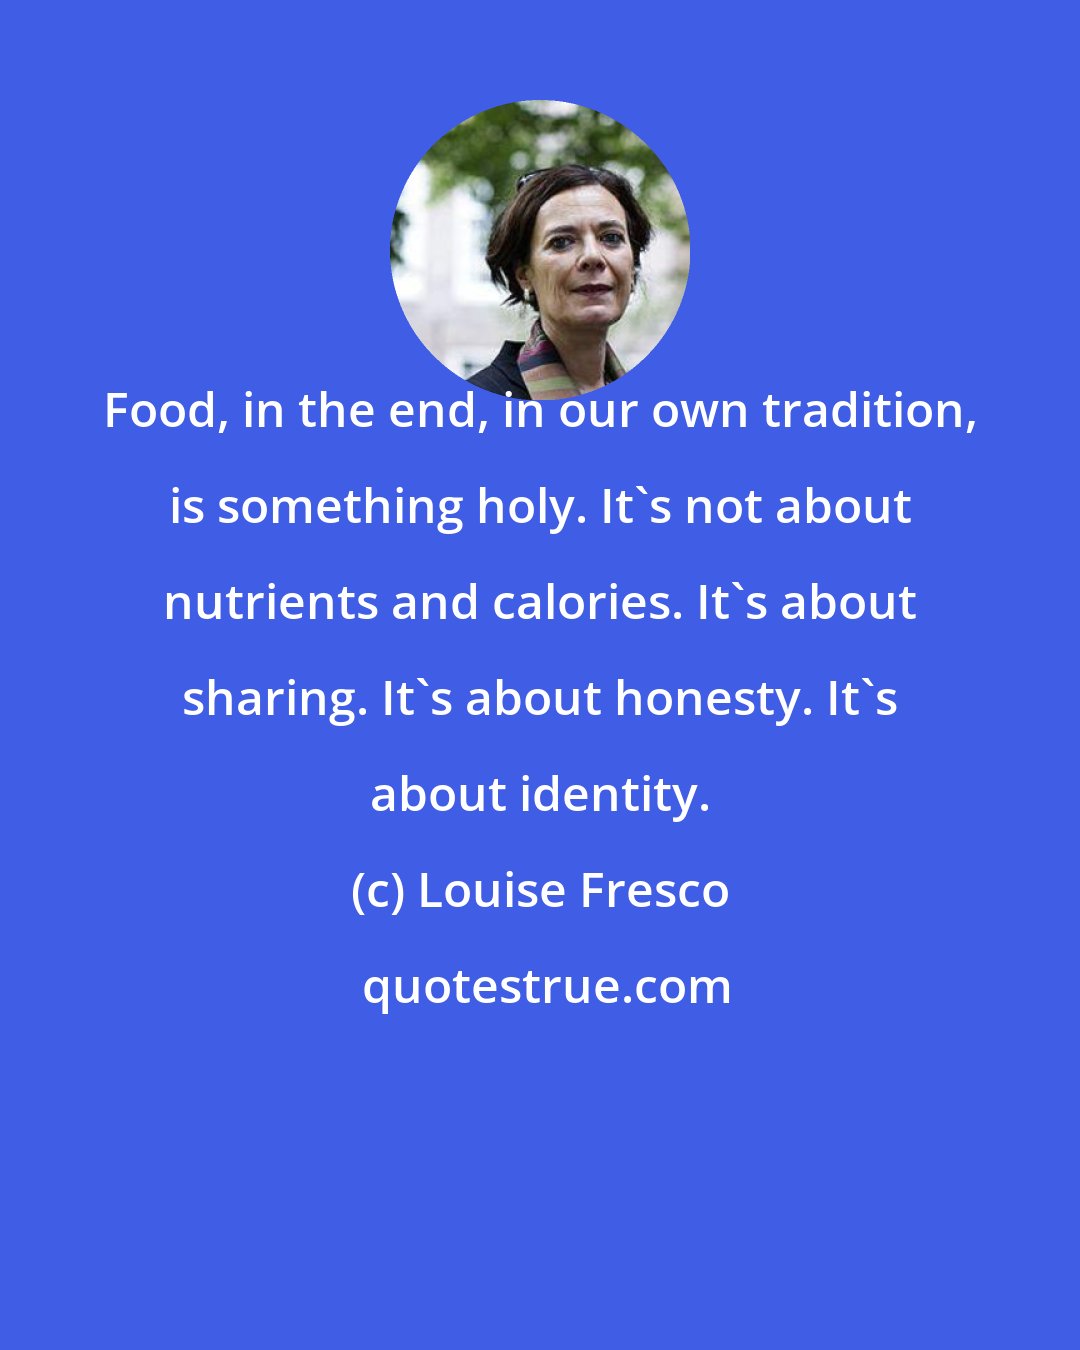 Louise Fresco: Food, in the end, in our own tradition, is something holy. It's not about nutrients and calories. It's about sharing. It's about honesty. It's about identity.